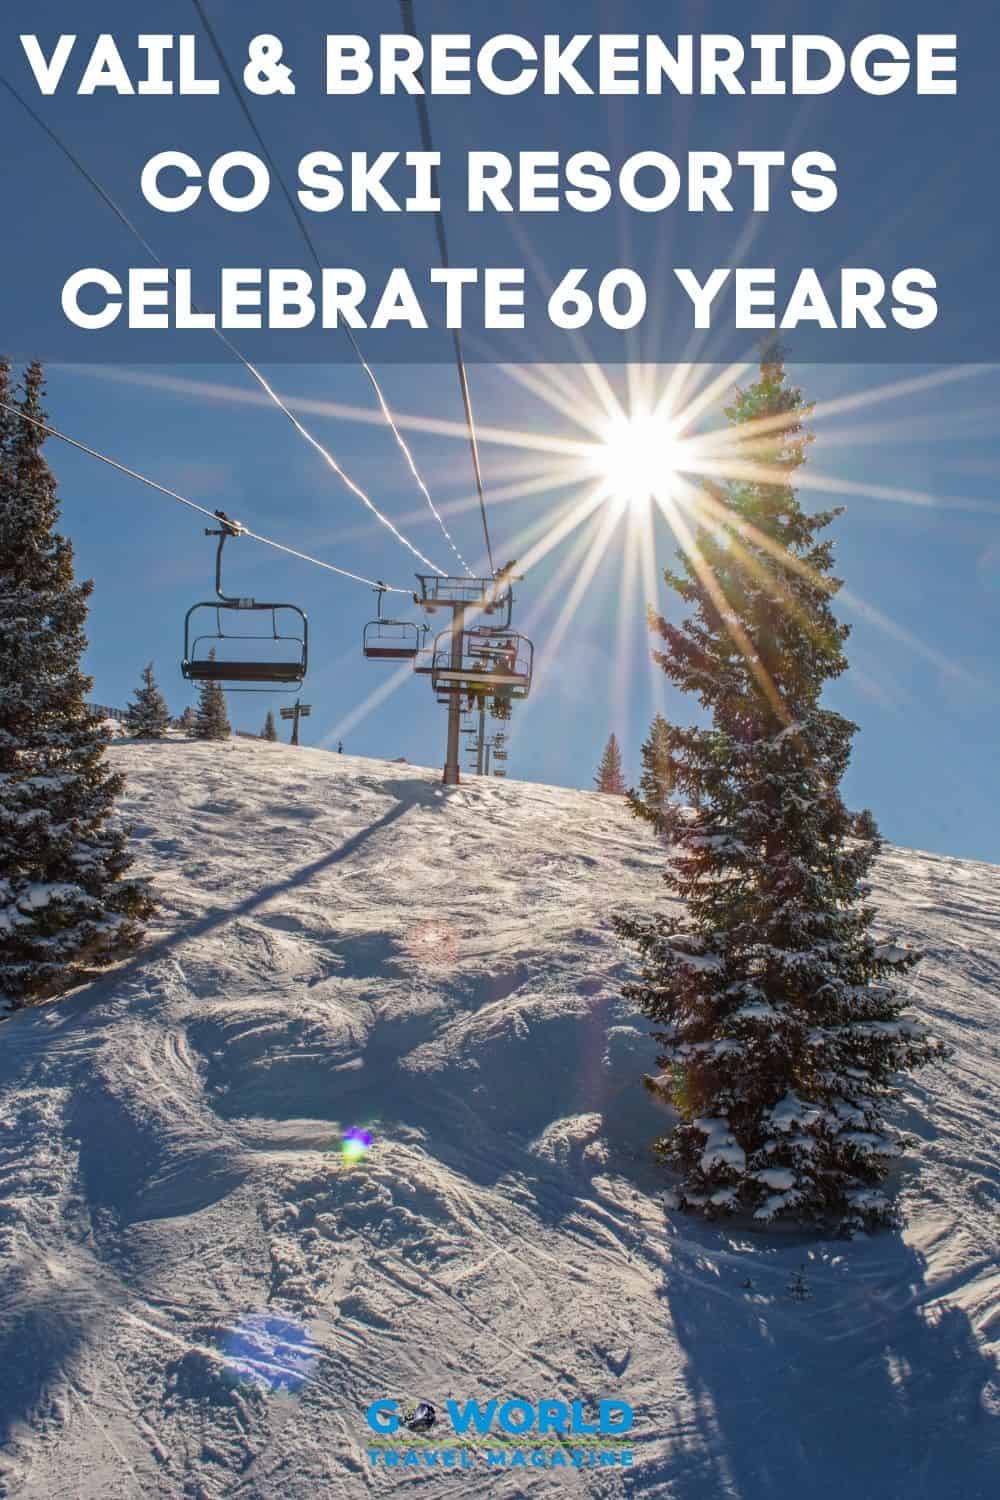 Vail and Breckenridge CO Ski Resorts celebrate their 60 year anniversary. Learn how it all began and led to the huge success of Vail Resorts. #Colorado #Skiresortsincolorado #vailcolorado